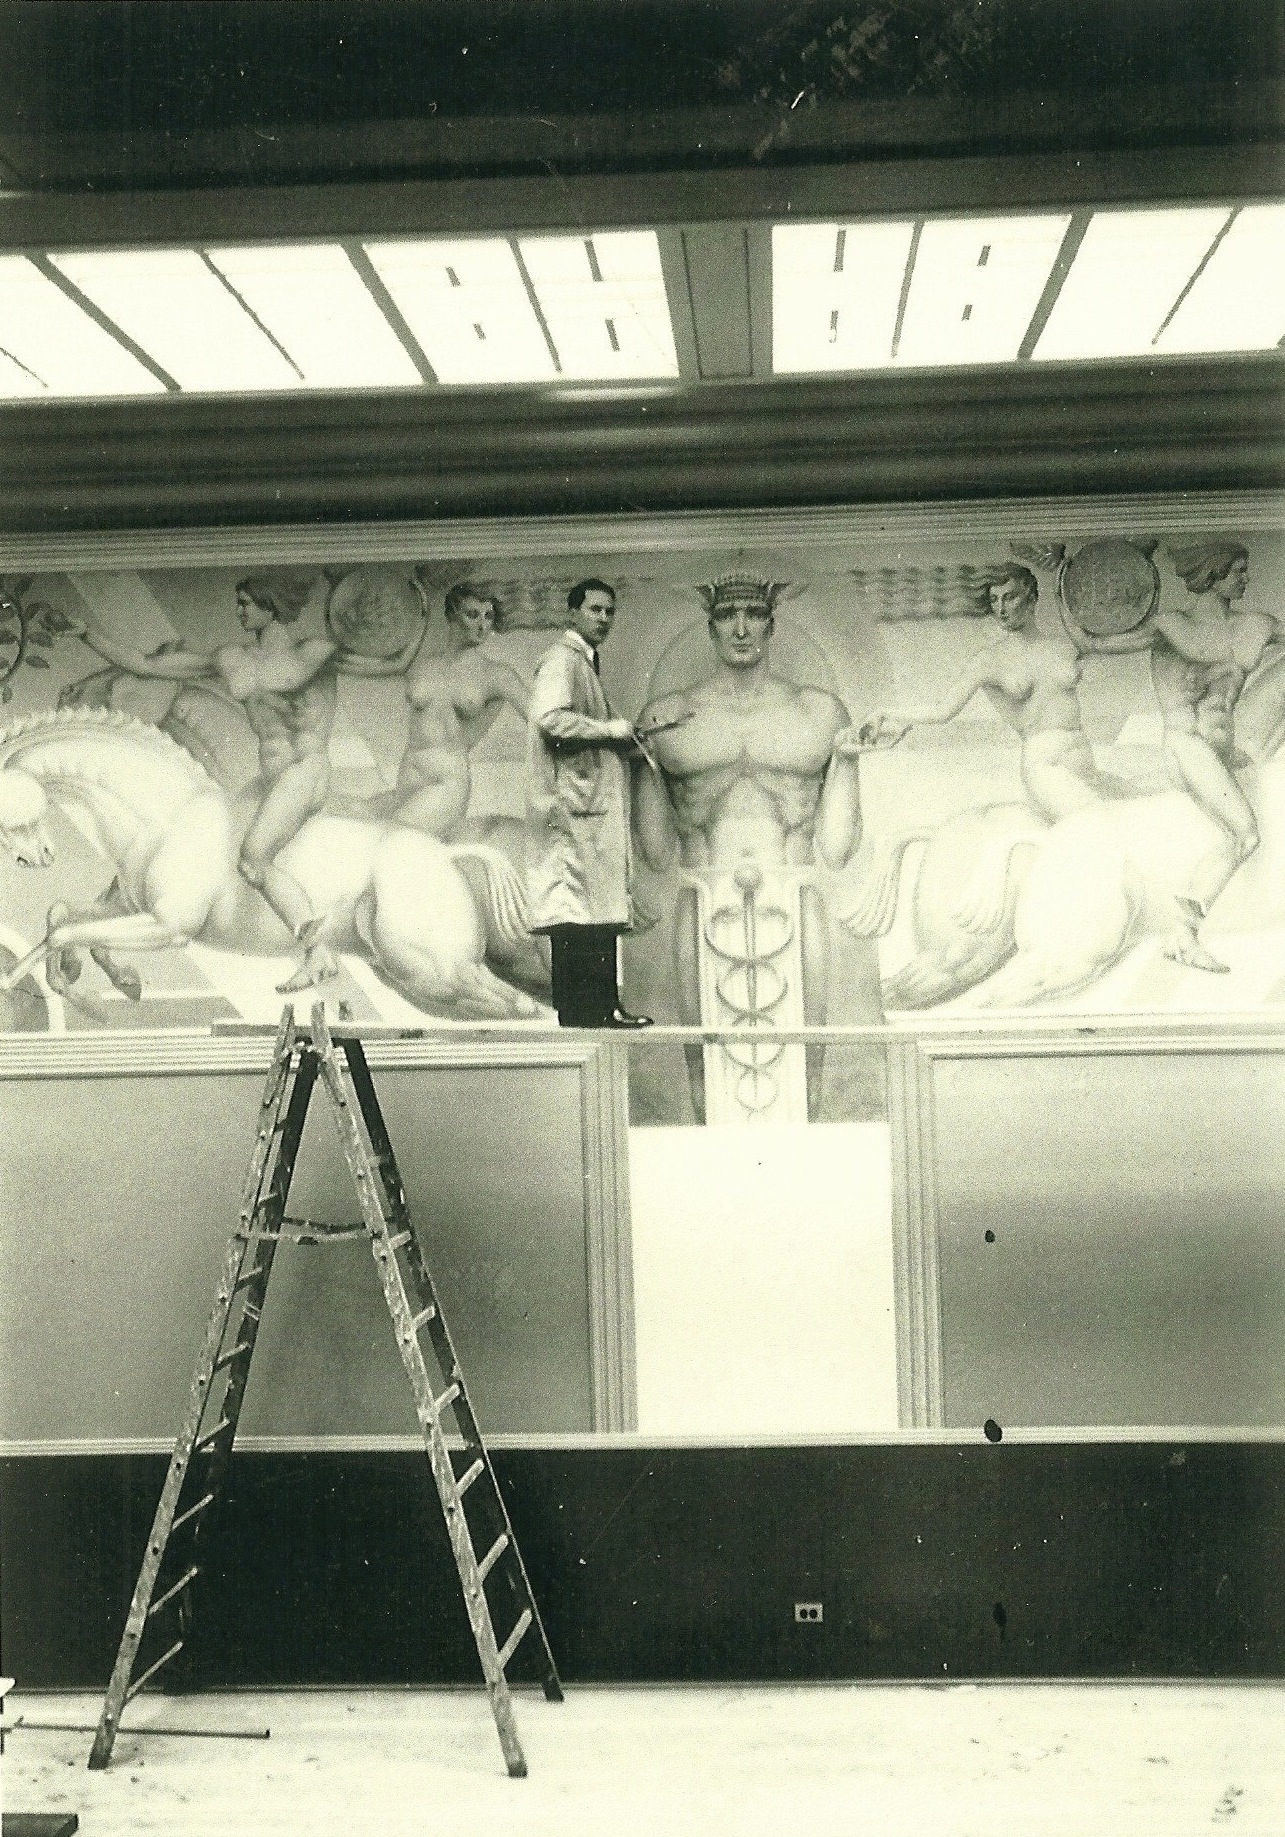 Angelo-painting-mural-for-AP-Gianini-Bank-of-America-at-the-exhibition-on-Treasure-Island-CA.jpg